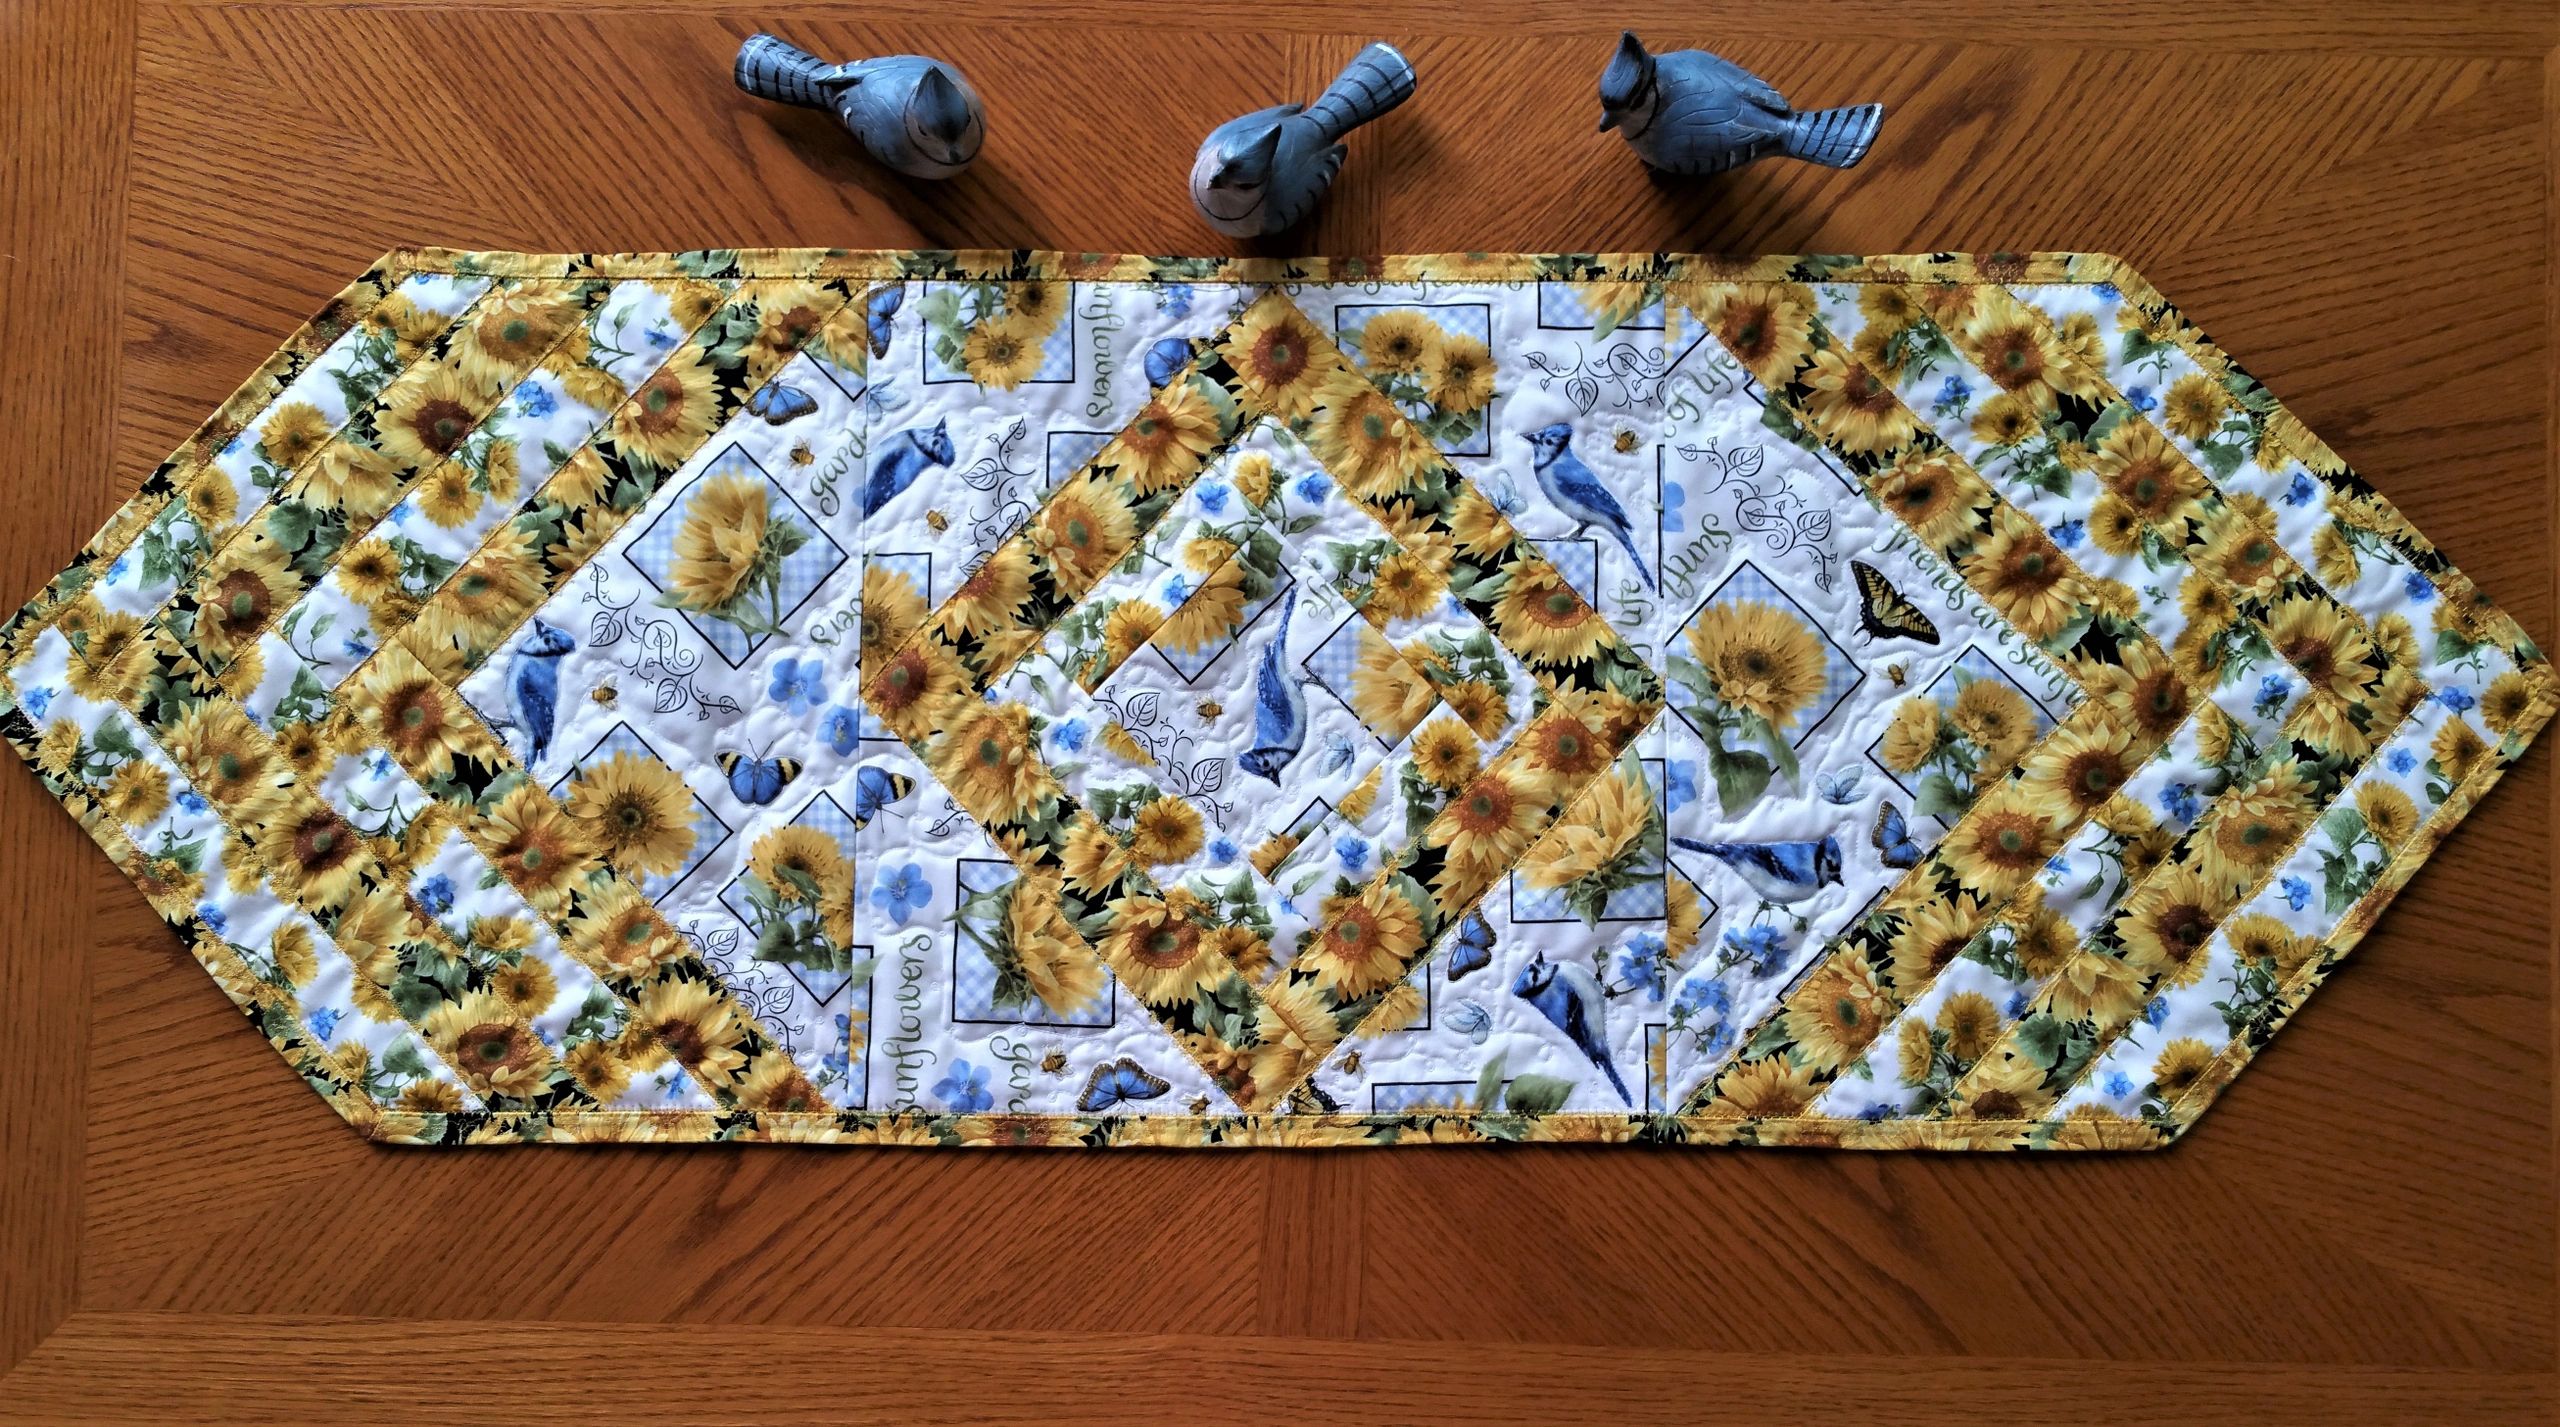 June Tailor Quilt As You Go Table Runner